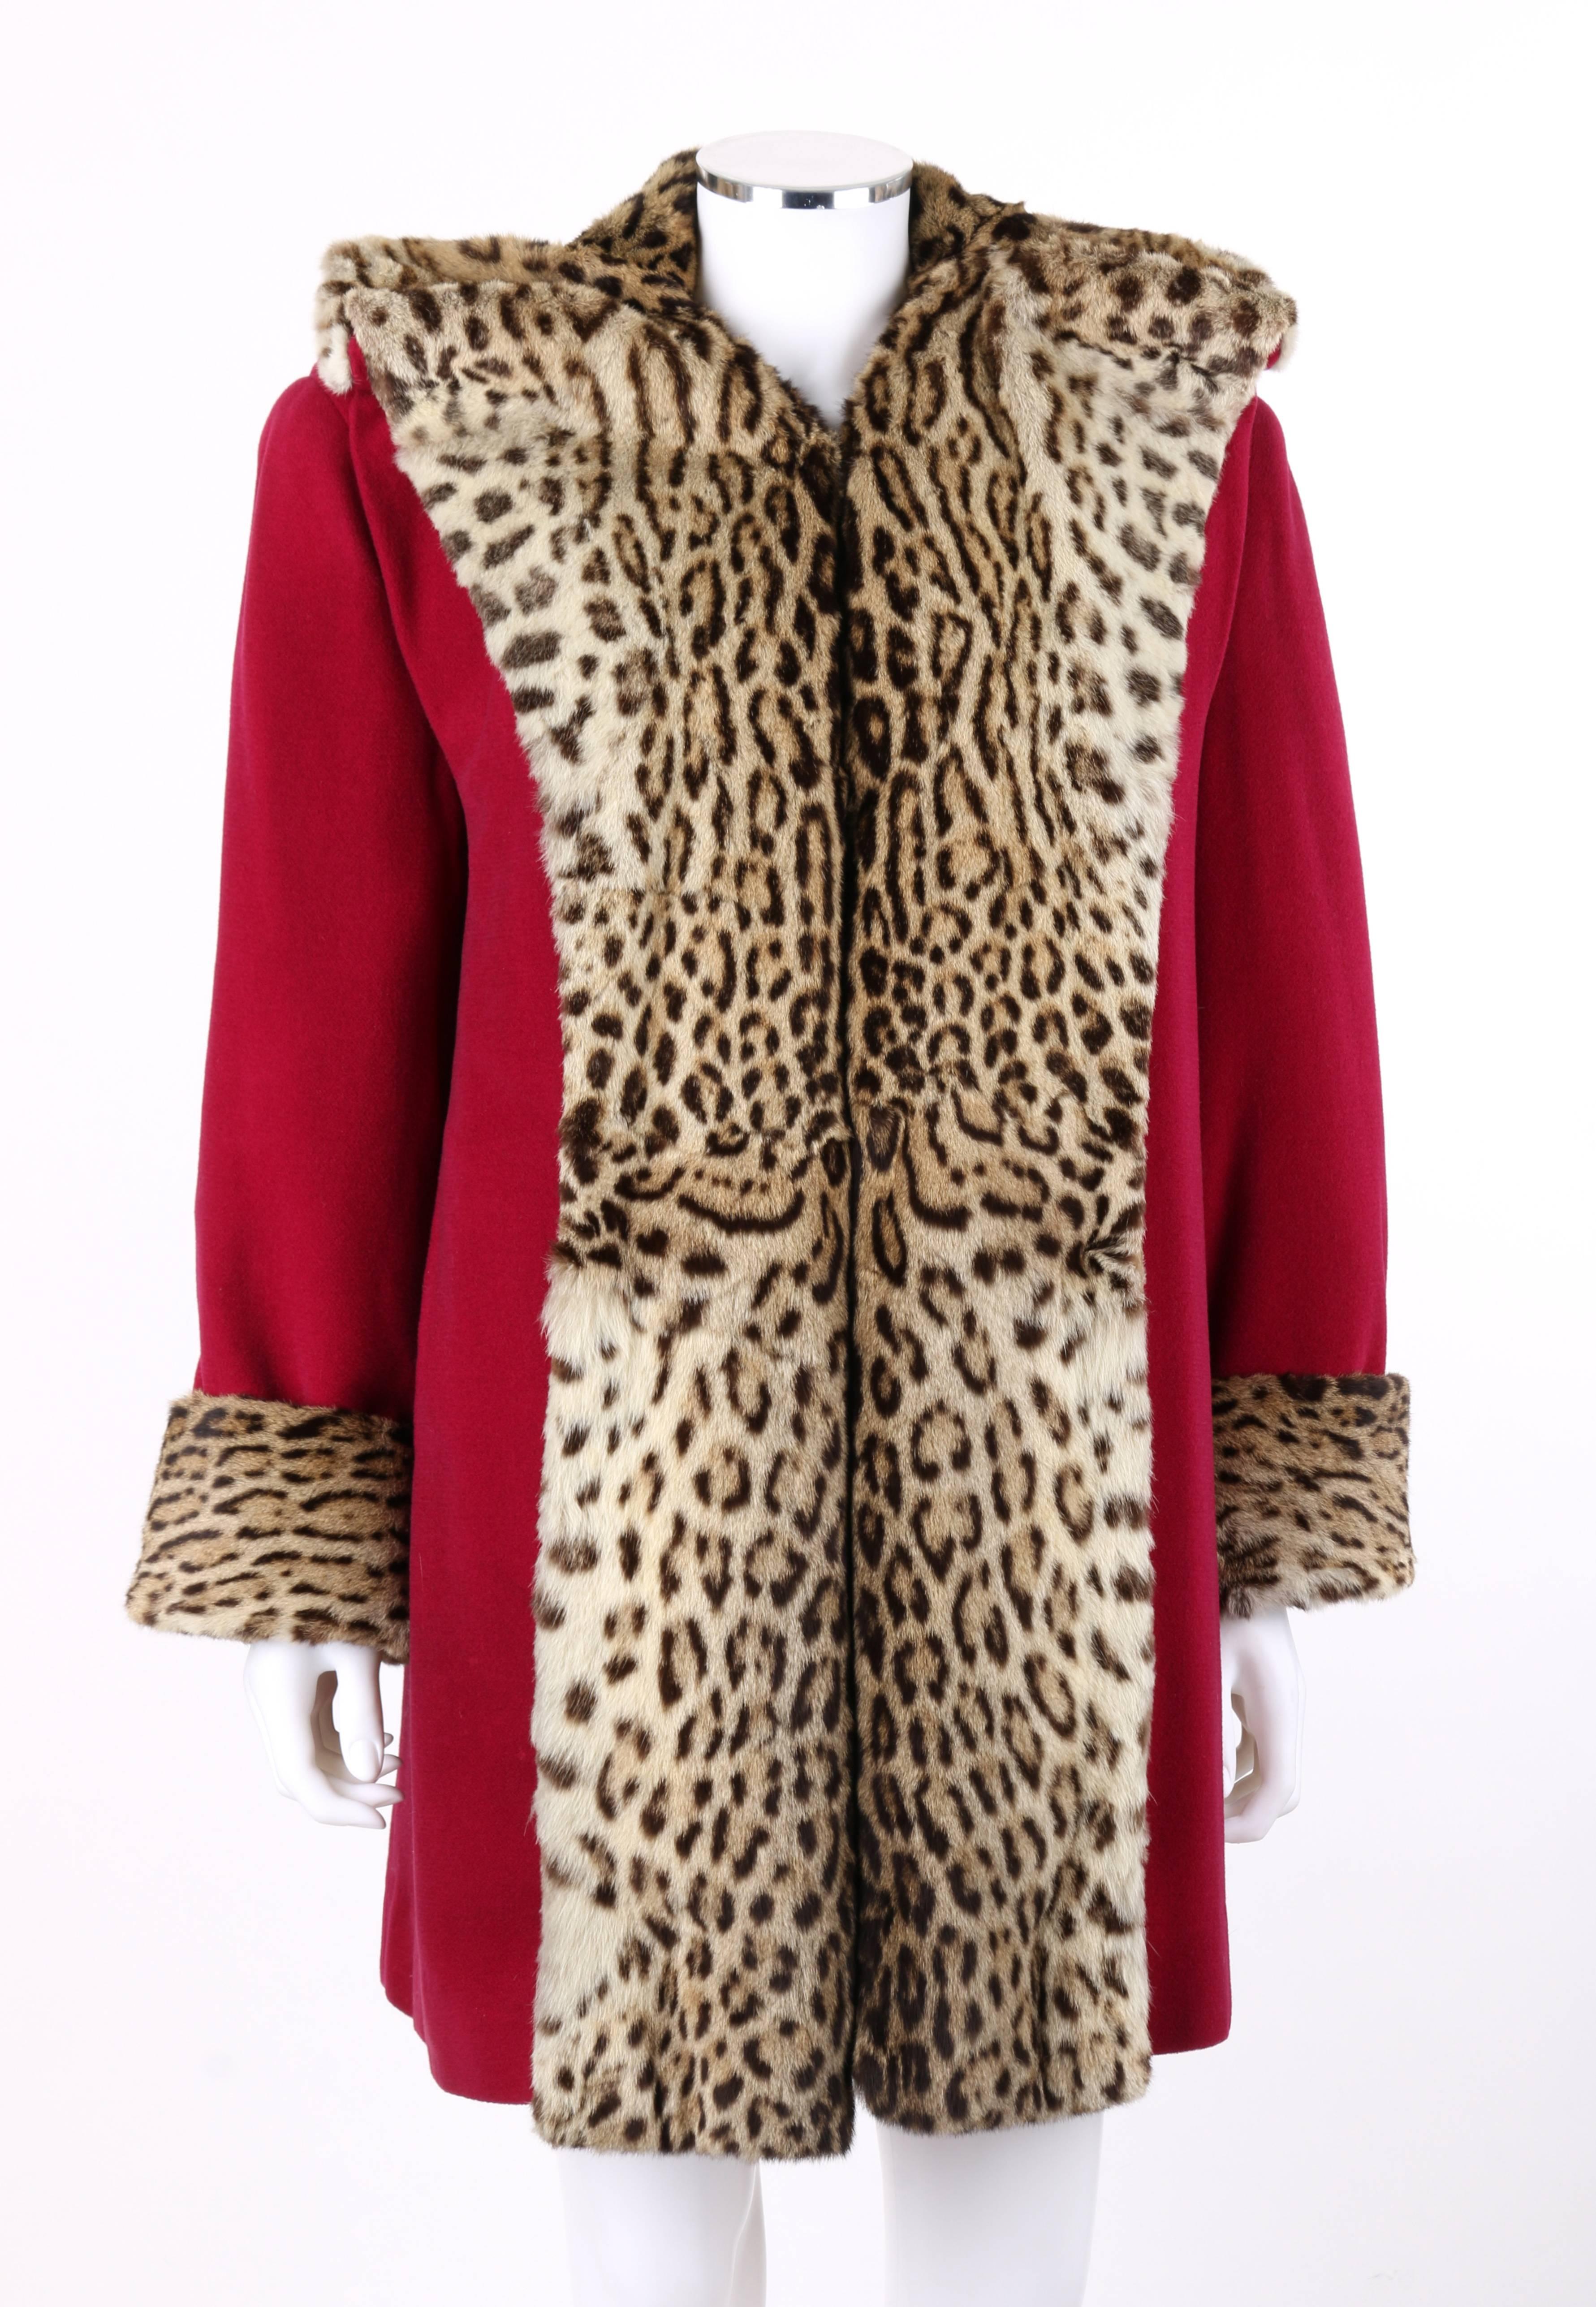 Vintage Russeks c.1940's raspberry red wool and spotted cat print dyed genuine fur trim mid-length box coat. Large genuine fur full tuxedo collar with pleated detail at shoulders. Long sleeves with large turned up genuine fur cuffs. Deep knife pleat